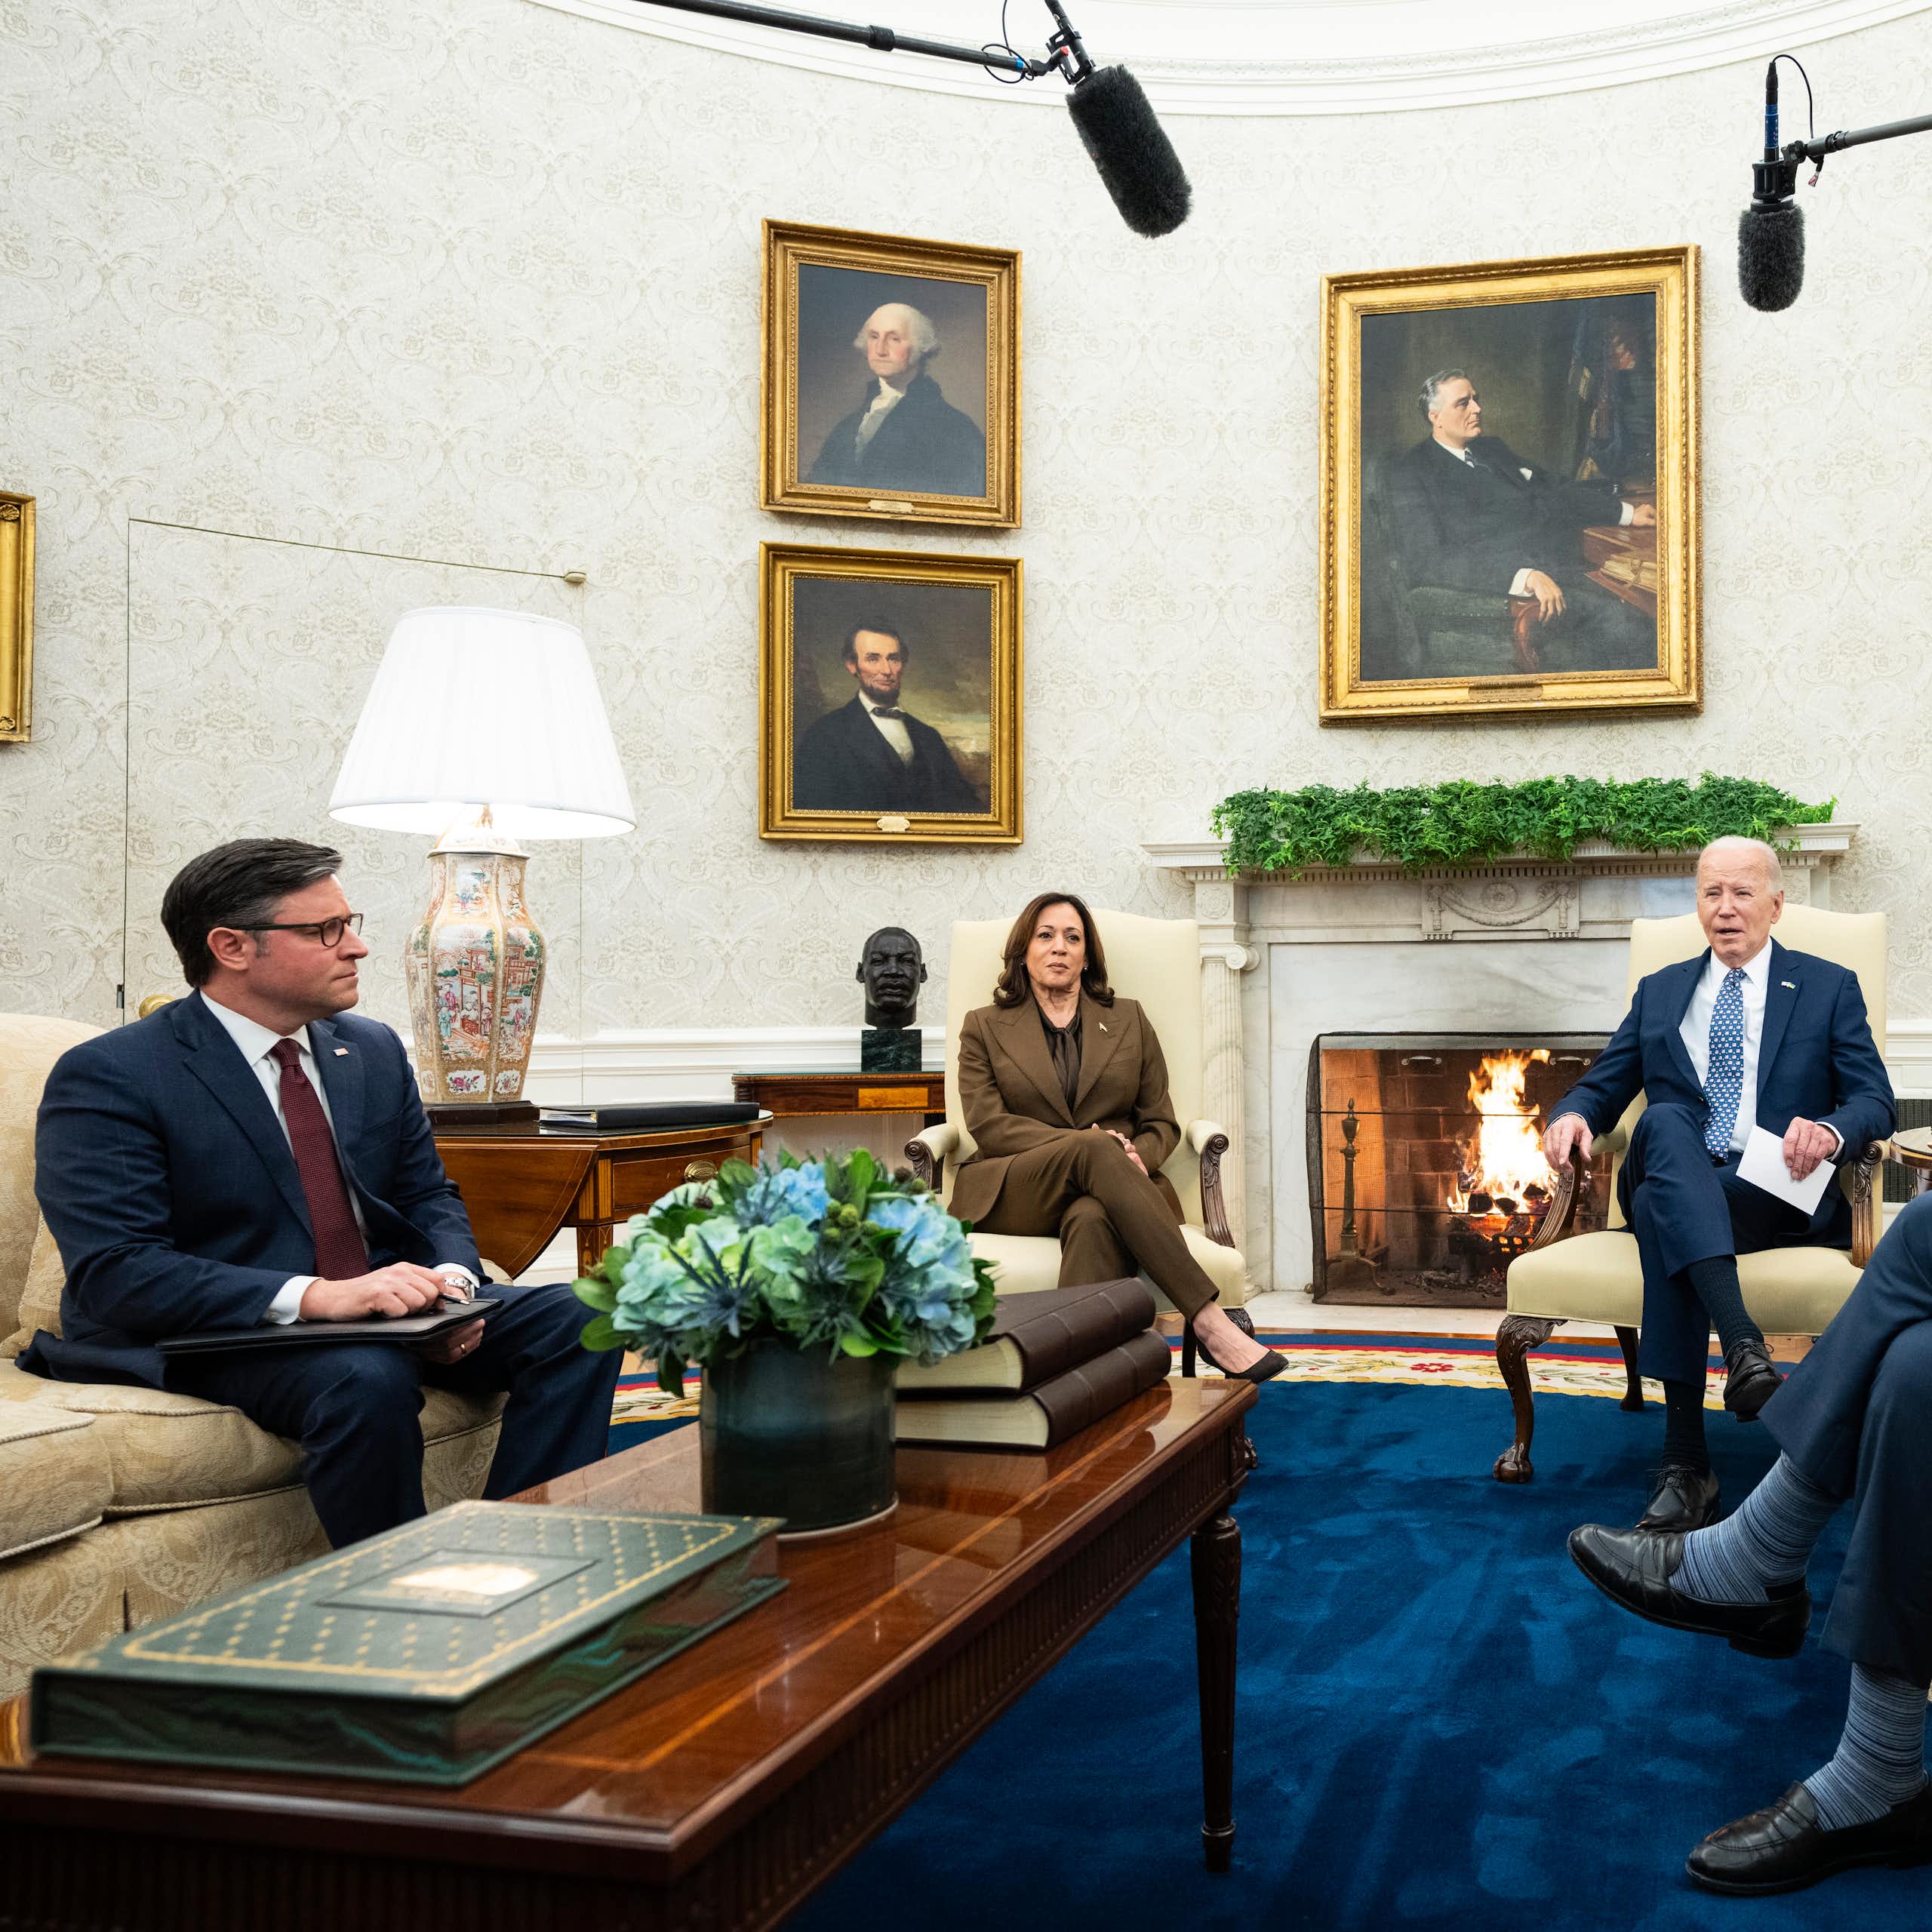 3 men and 1 woman are sitting on couches in an ornate room with presidential portraits on the wall and a fireplace